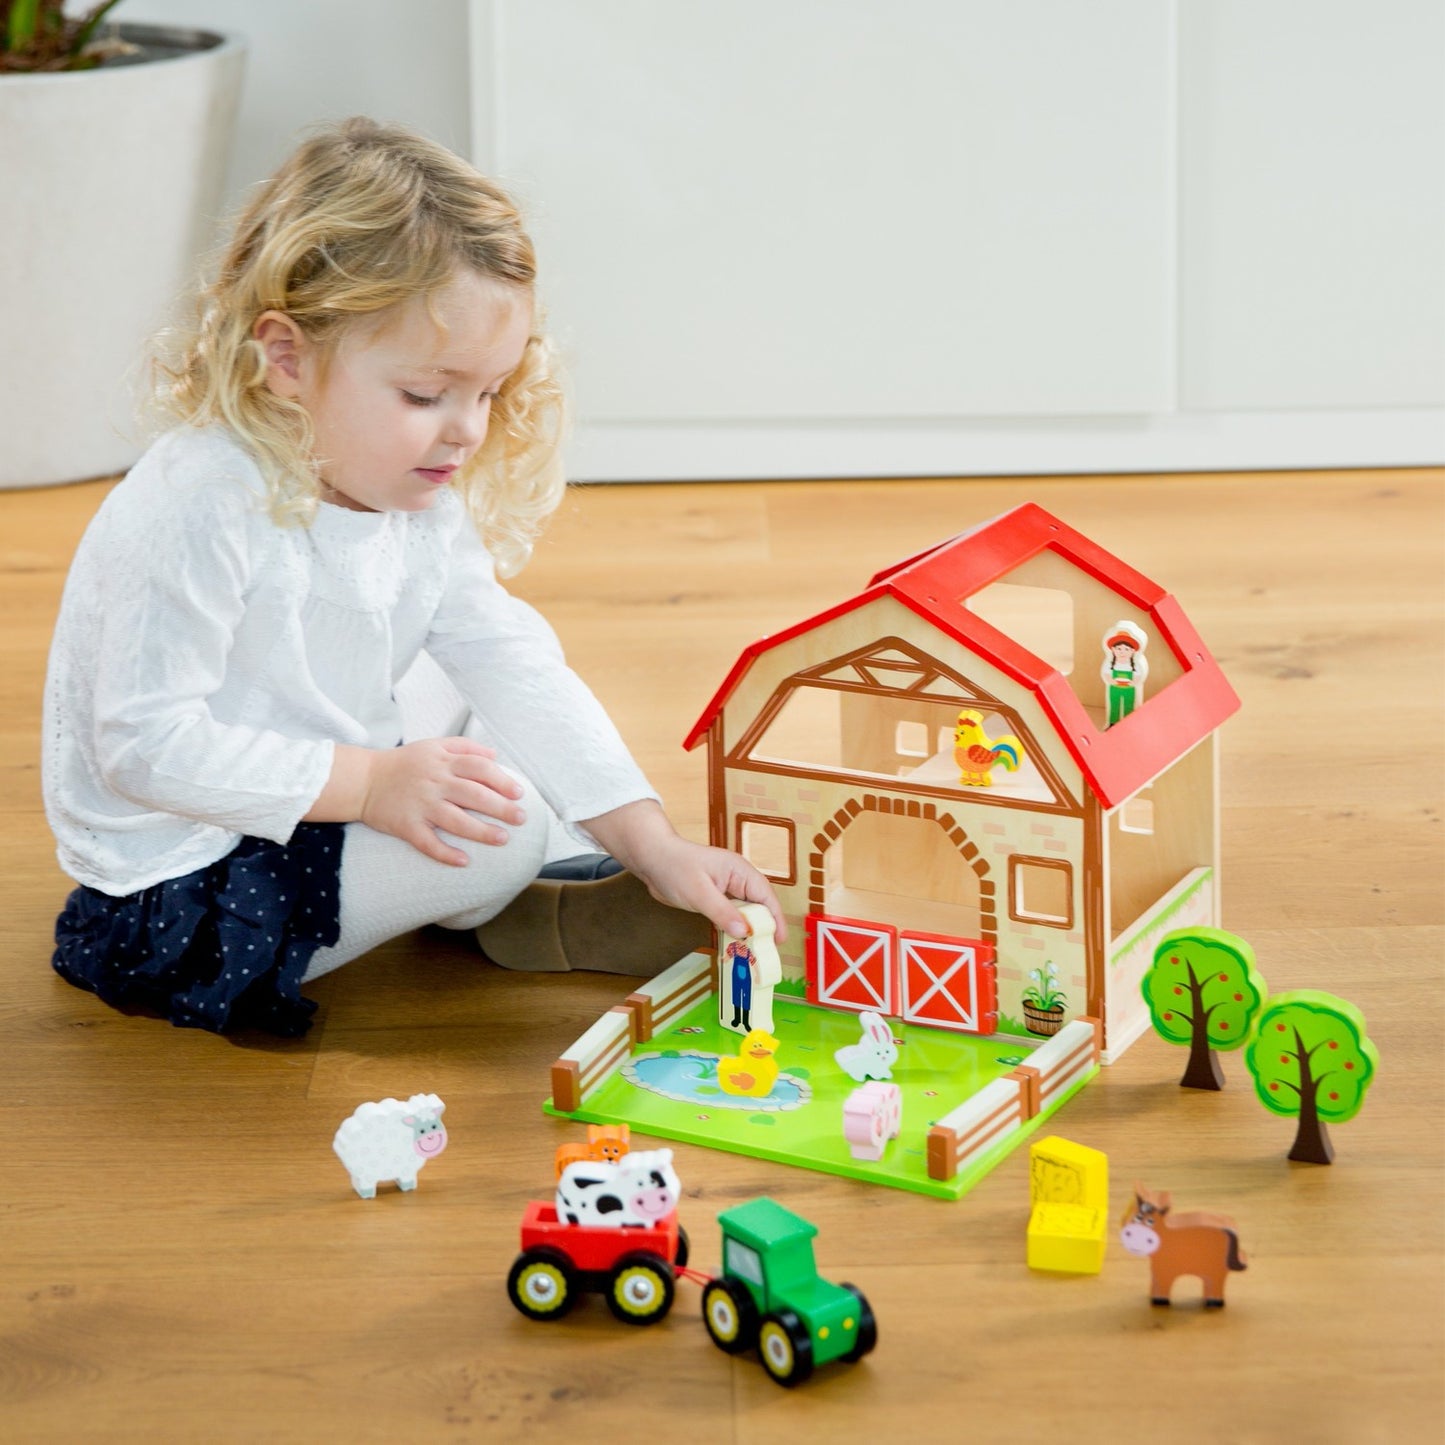 New Classic Wooden Toy Farm Play Set | Imaginative Play Toys | Lifestyle – Girl Playing with Wooden Figure | BeoVERDE.ie